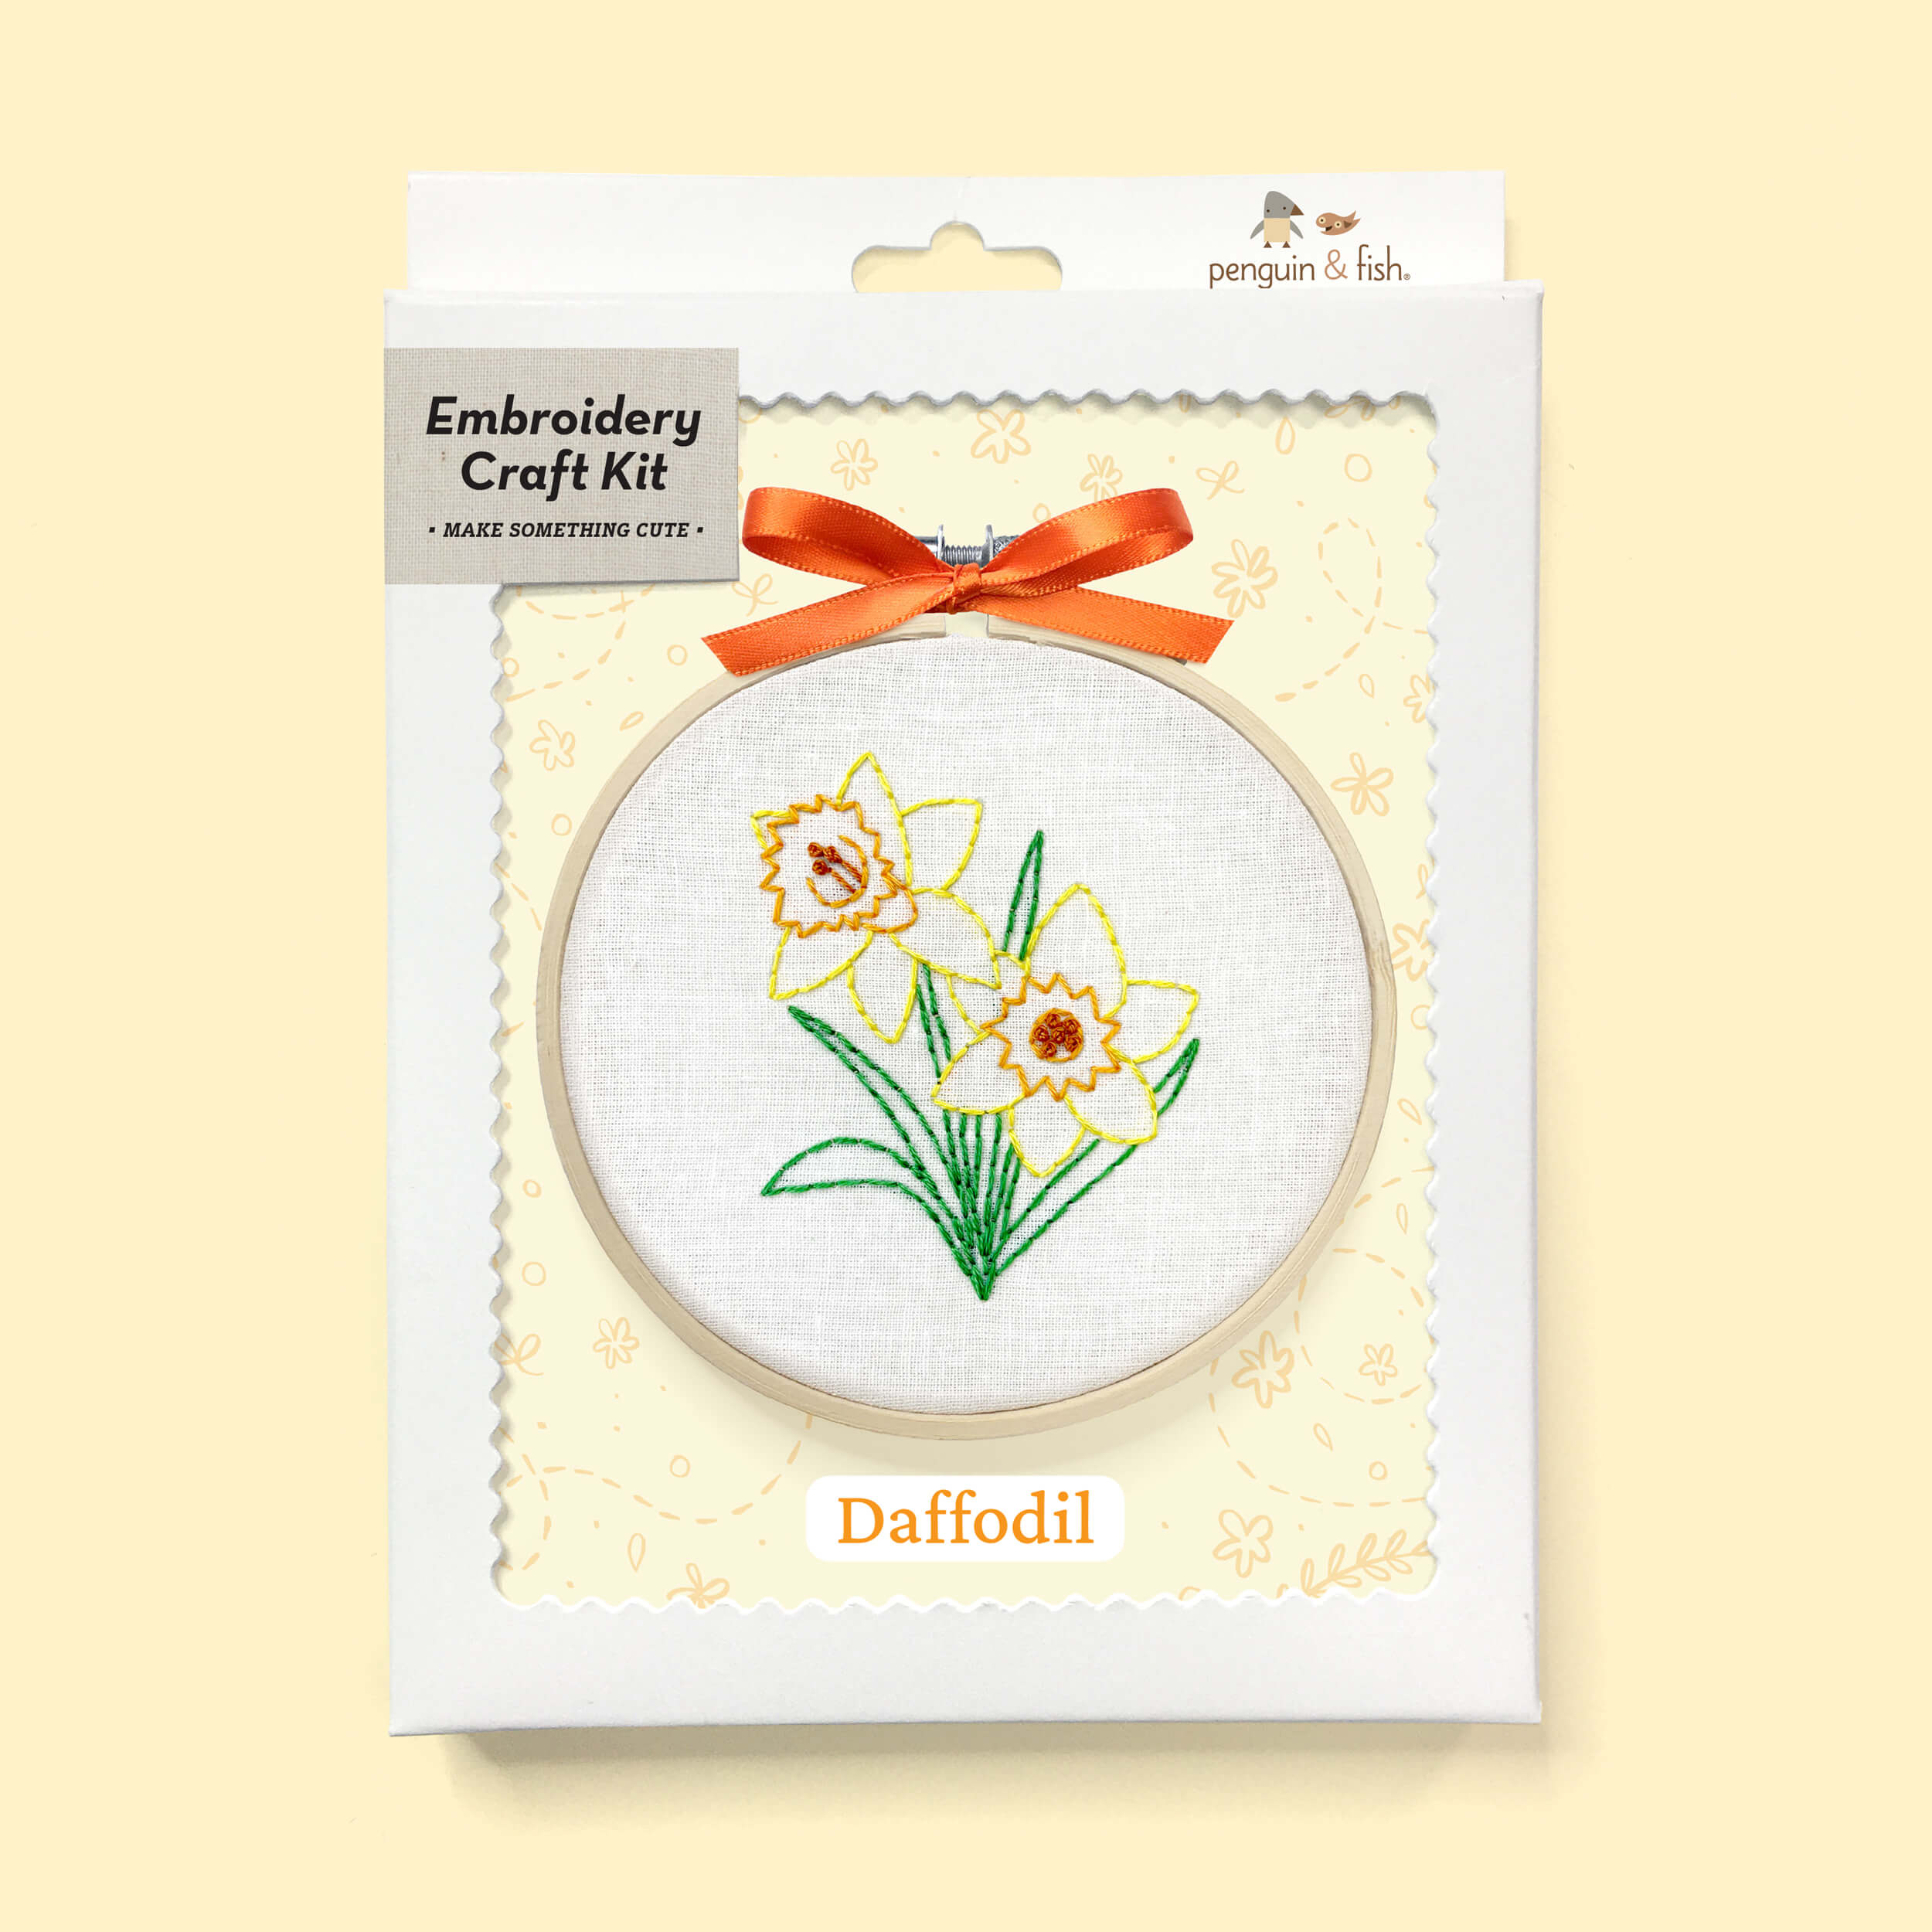 Daffodil 4-inch embroidery kit with supplies in a box